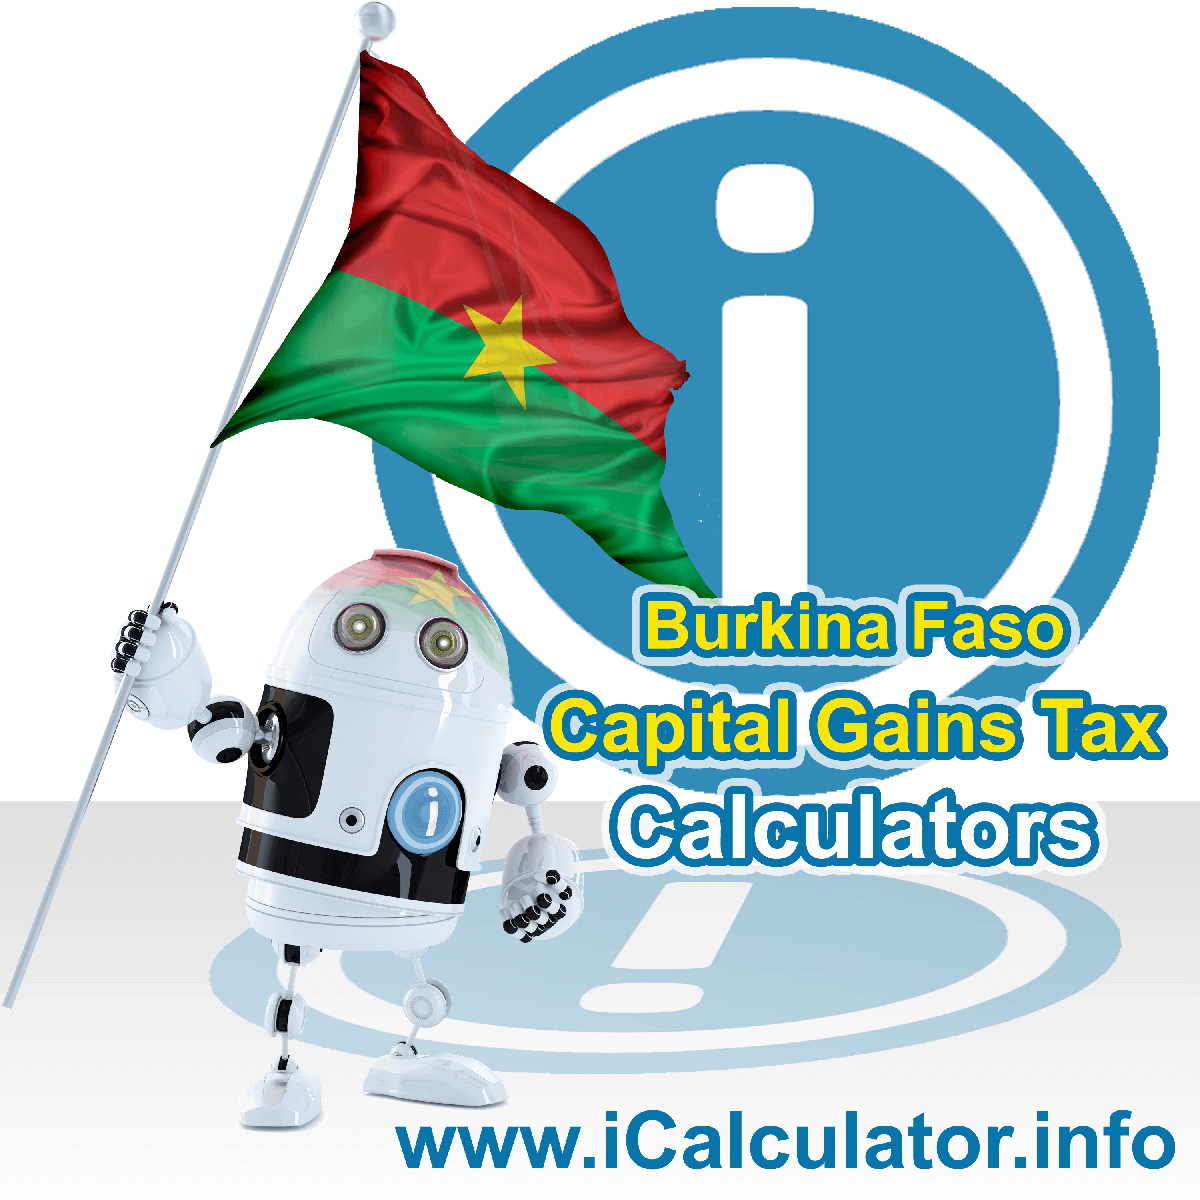 Burkina Faso Capital Gains Tax Calculator. This image shows the Burkina Faso flag and information relating to the capital gains tax rate formula used for calculating Capital Gains Tax in Burkina Faso using the Burkina Faso Capital Gains Tax Calculator in 2022